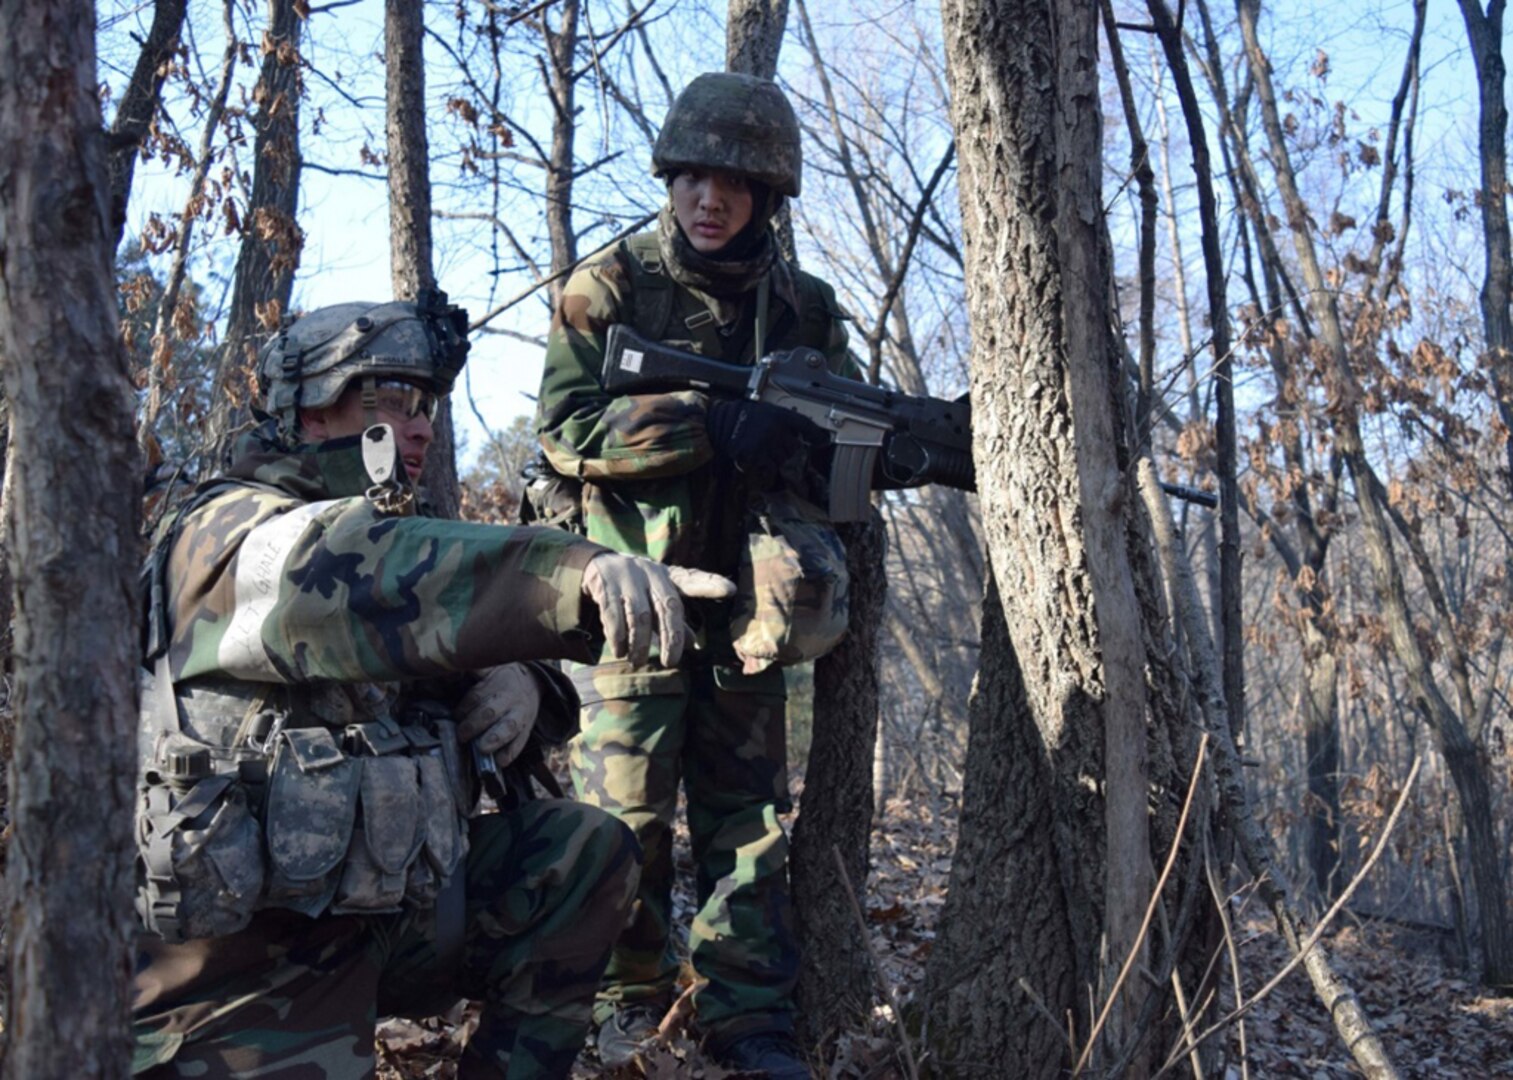 A U.S. Army Soldier from 1st Battalion, 16th Infantry Regiment, 1st Armored Brigade Combat Team, 1st Infantry Division, coordinates movement with a South Korean Army soldier during exercise Warrior Strike 5 at the Rodriguez Live Fire Complex in Pocheon, South Korea Feb. 16, 2017. The four-day long exercise included more Republic of Korea Army soldiers than any previous Warrior Strike exercise. 